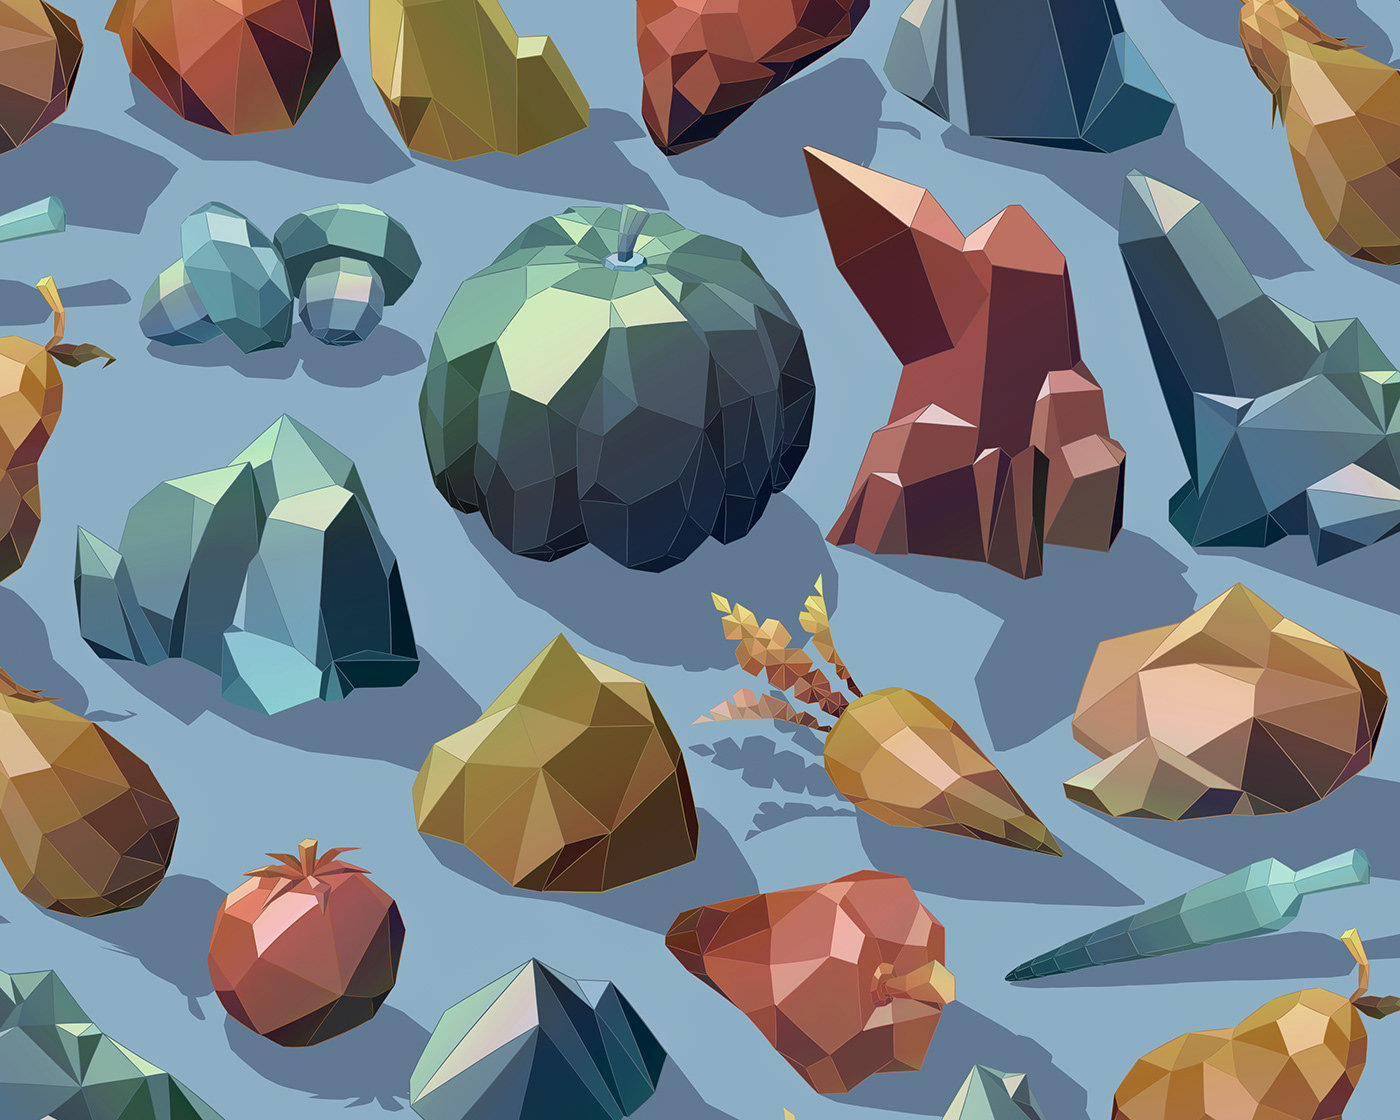 Digital illustration of low-poly crystals and fruits in metallic bronze, silver and gold colours.